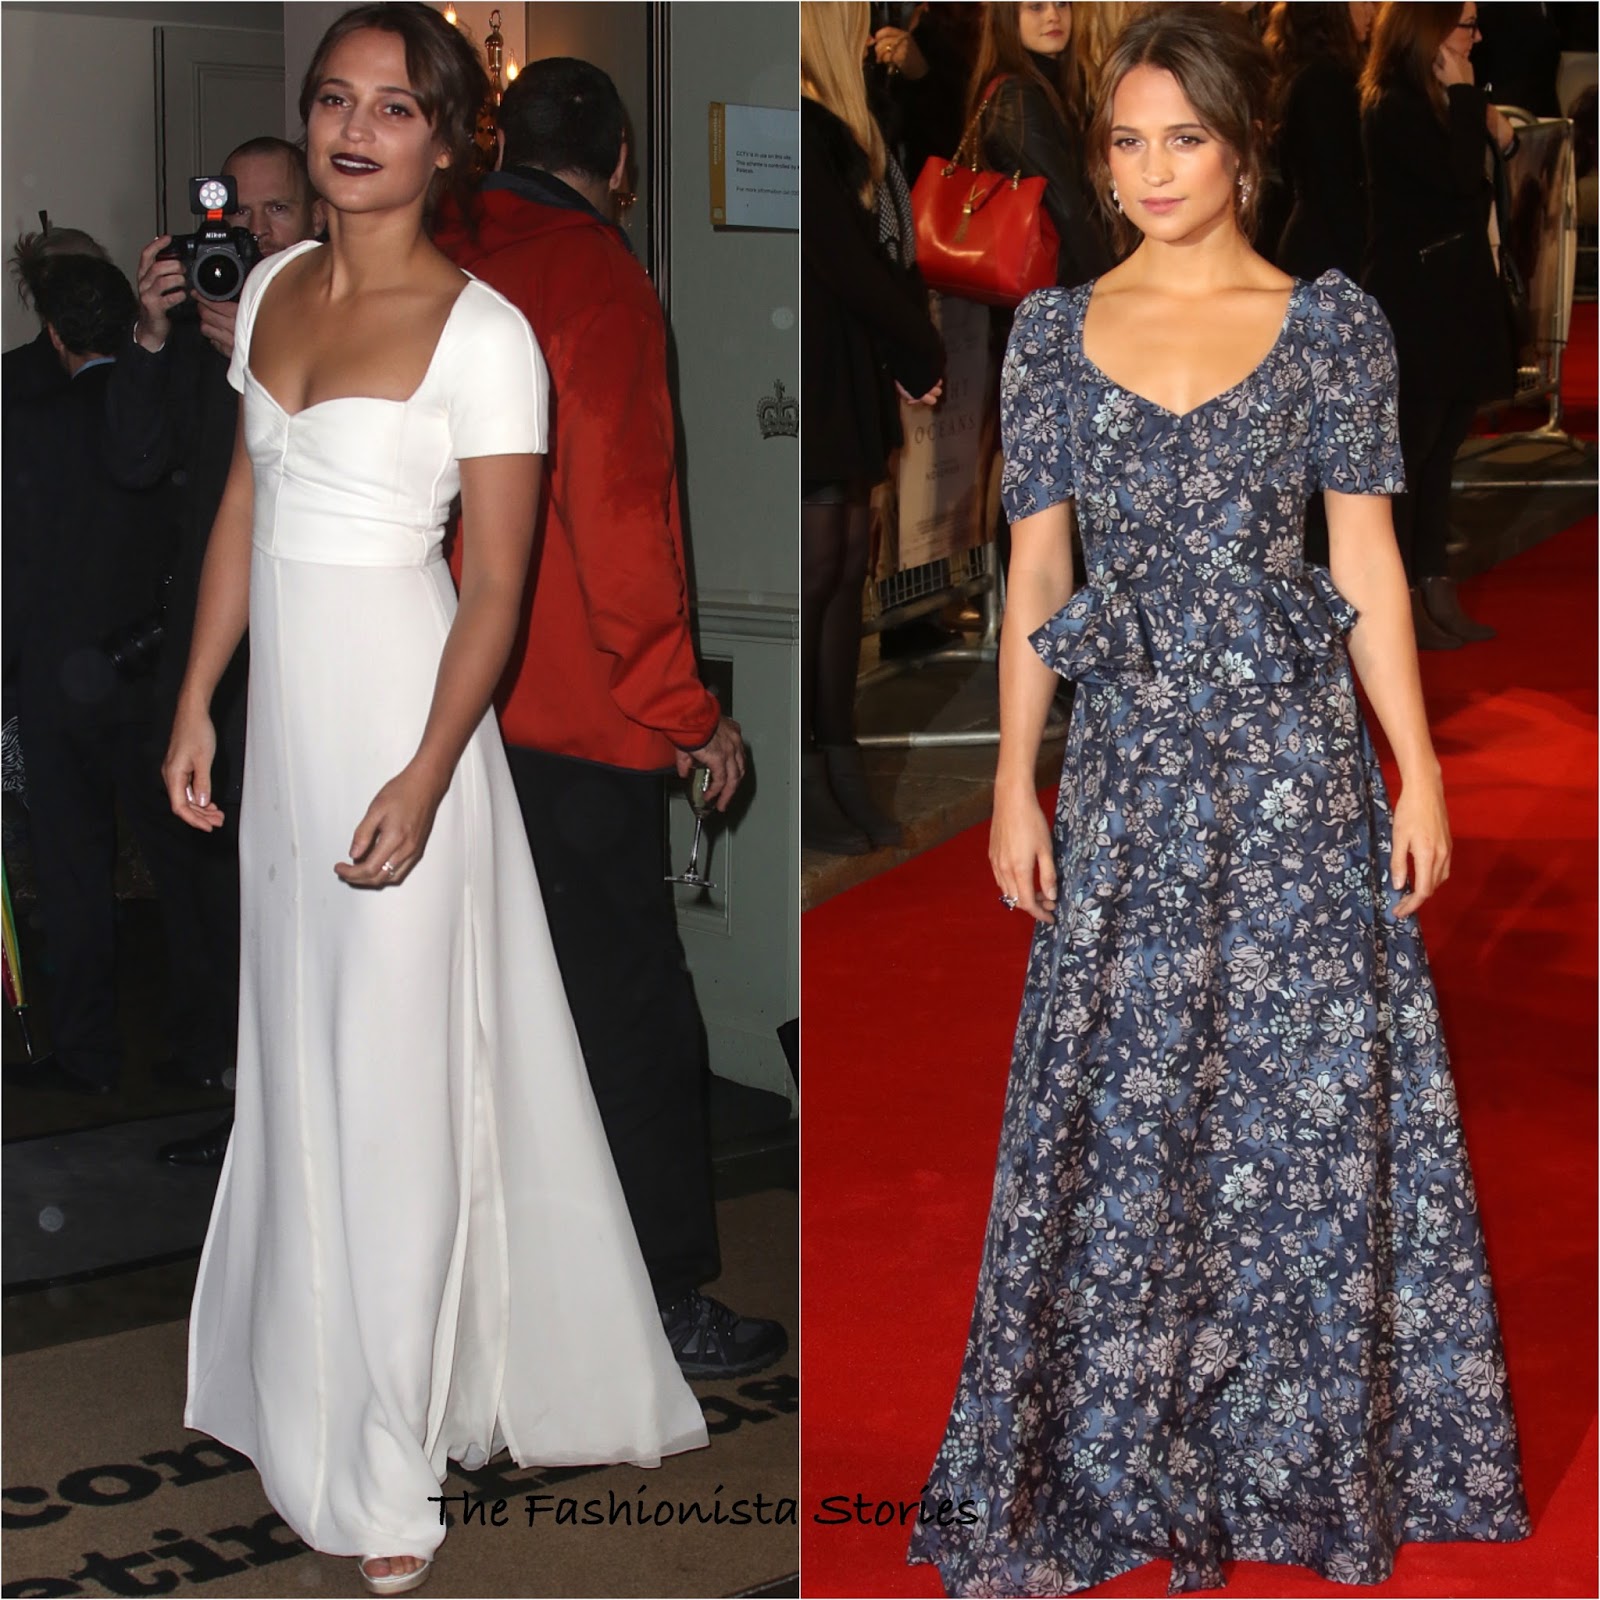 Alicia Vikander in Louis Vuitton at the 60th BFI London Film Festival  Awards & The Light Between Oceans Premiere